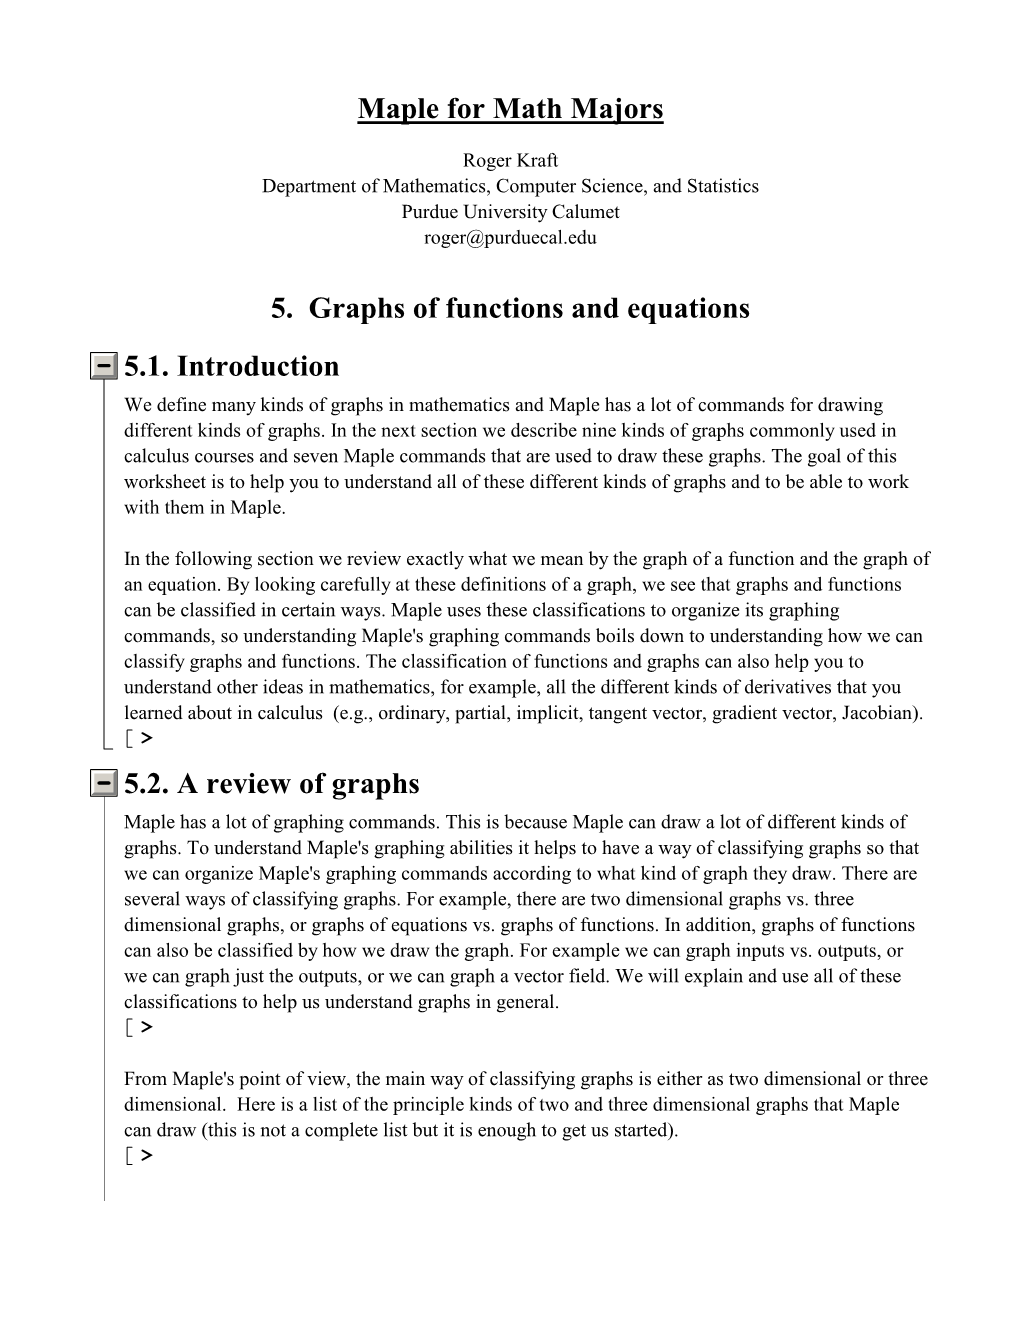 Maple for Math Majors 5. Graphs of Functions and Equations 5.1